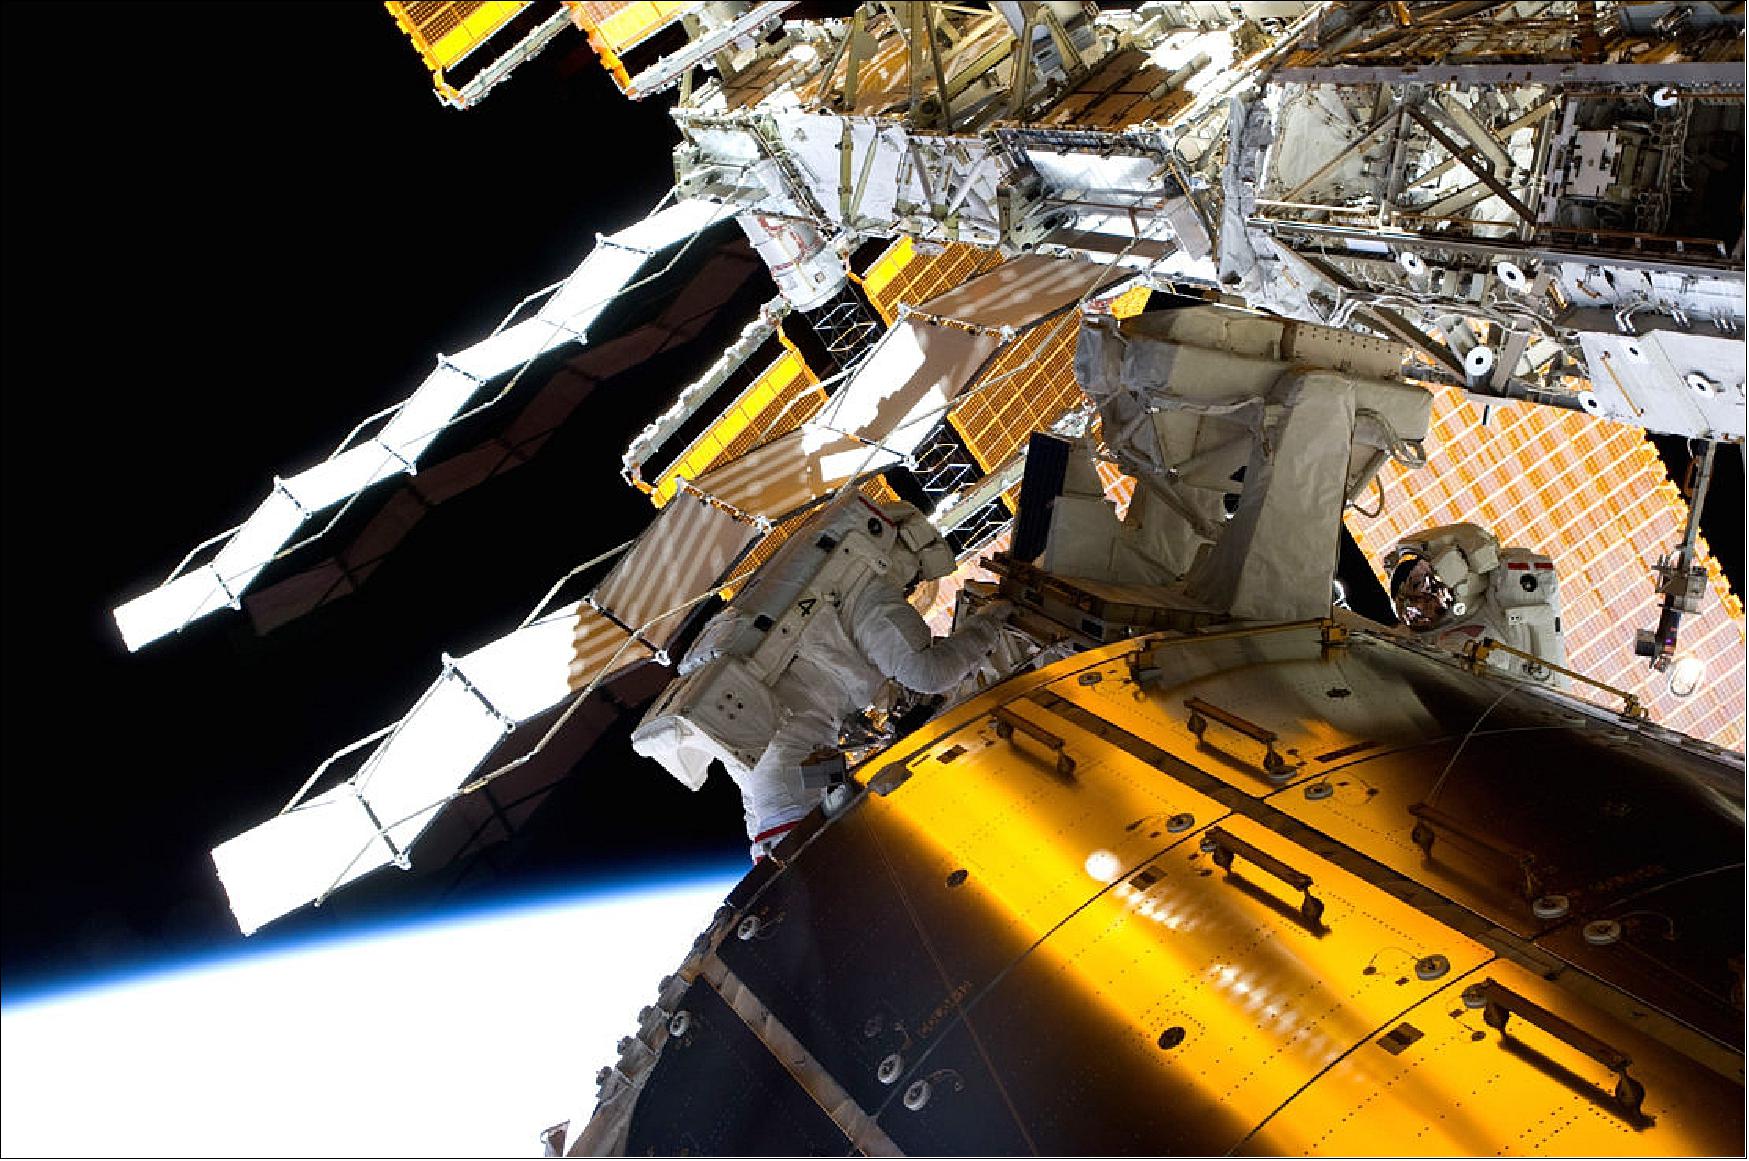 Figure 23: From fundamental physics to exobiology, the International Space Station's Columbus lab tackles big questions in space science. During the 2009 spacewalk pictured here, NASA astronauts John Olivas and Nicole Stott retrieved EUTEF (European Technology Exposure Facility), which was attached outside Columbus, for return to Earth for analysis (image credit: NASA7ESA)